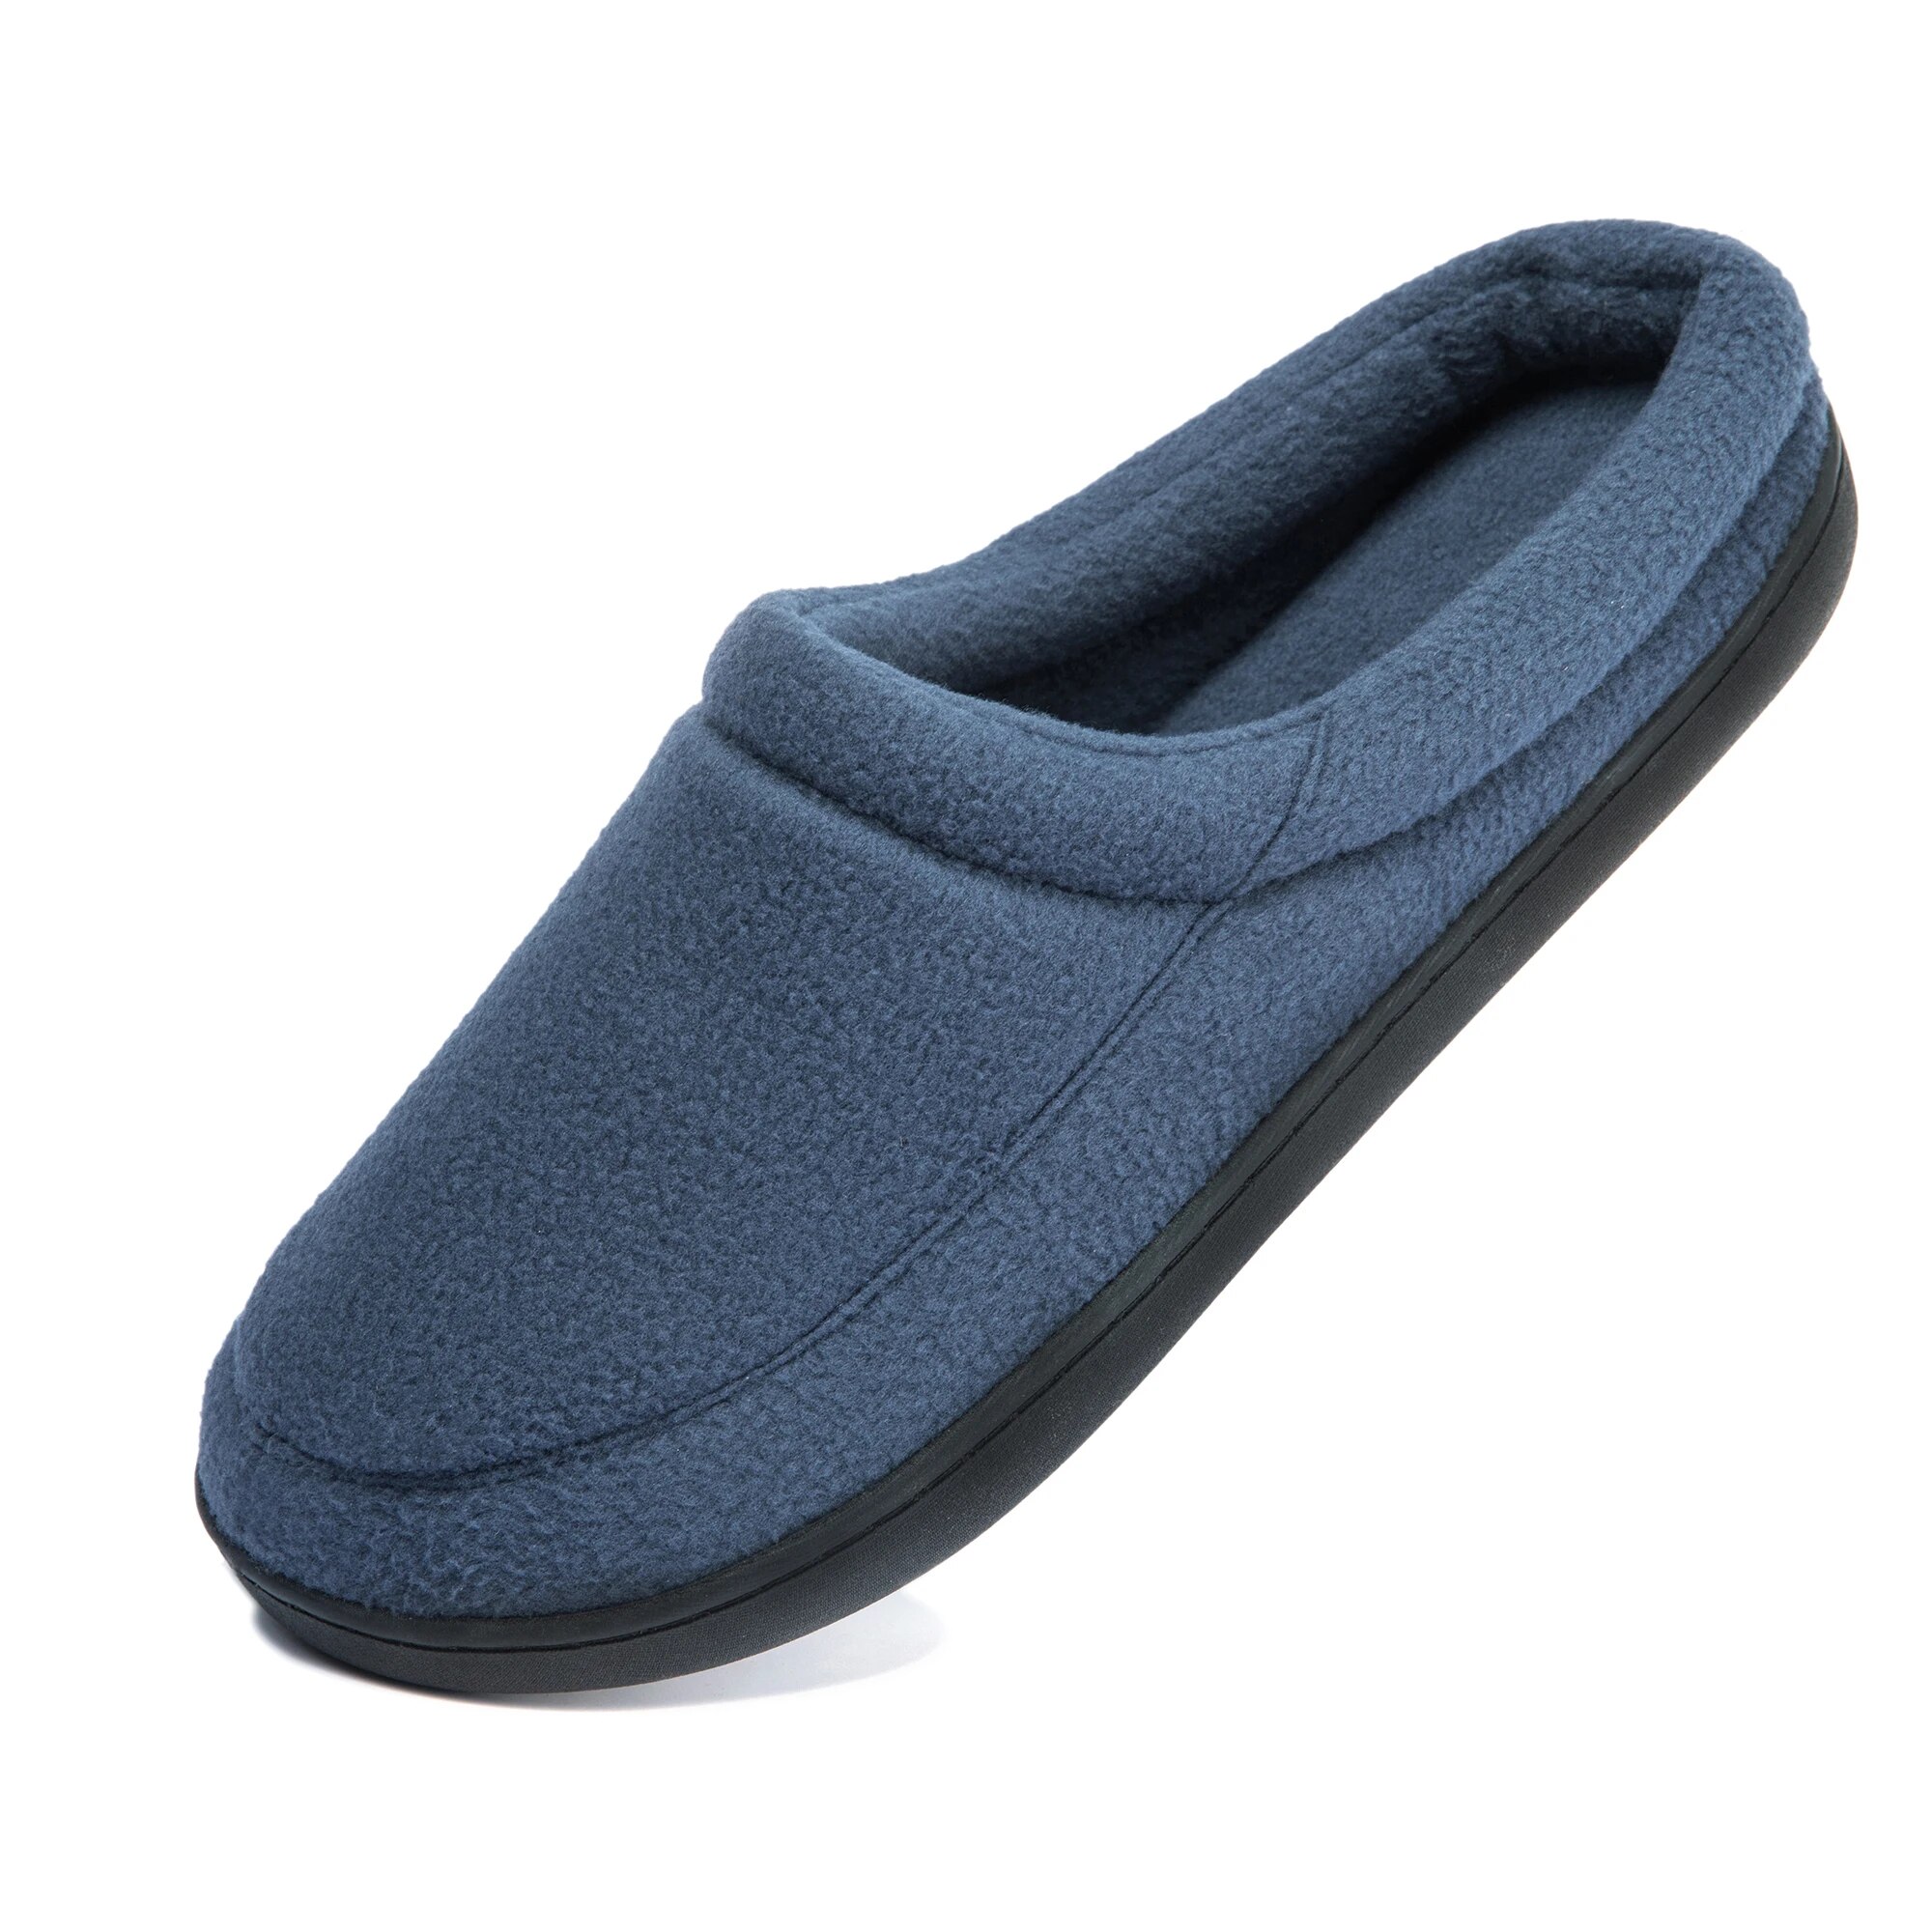 Men's Shoes House Slippers Plush Fashion Memory Foam Winter Slippers Man Home Soft Slippers Slip-on Shoes